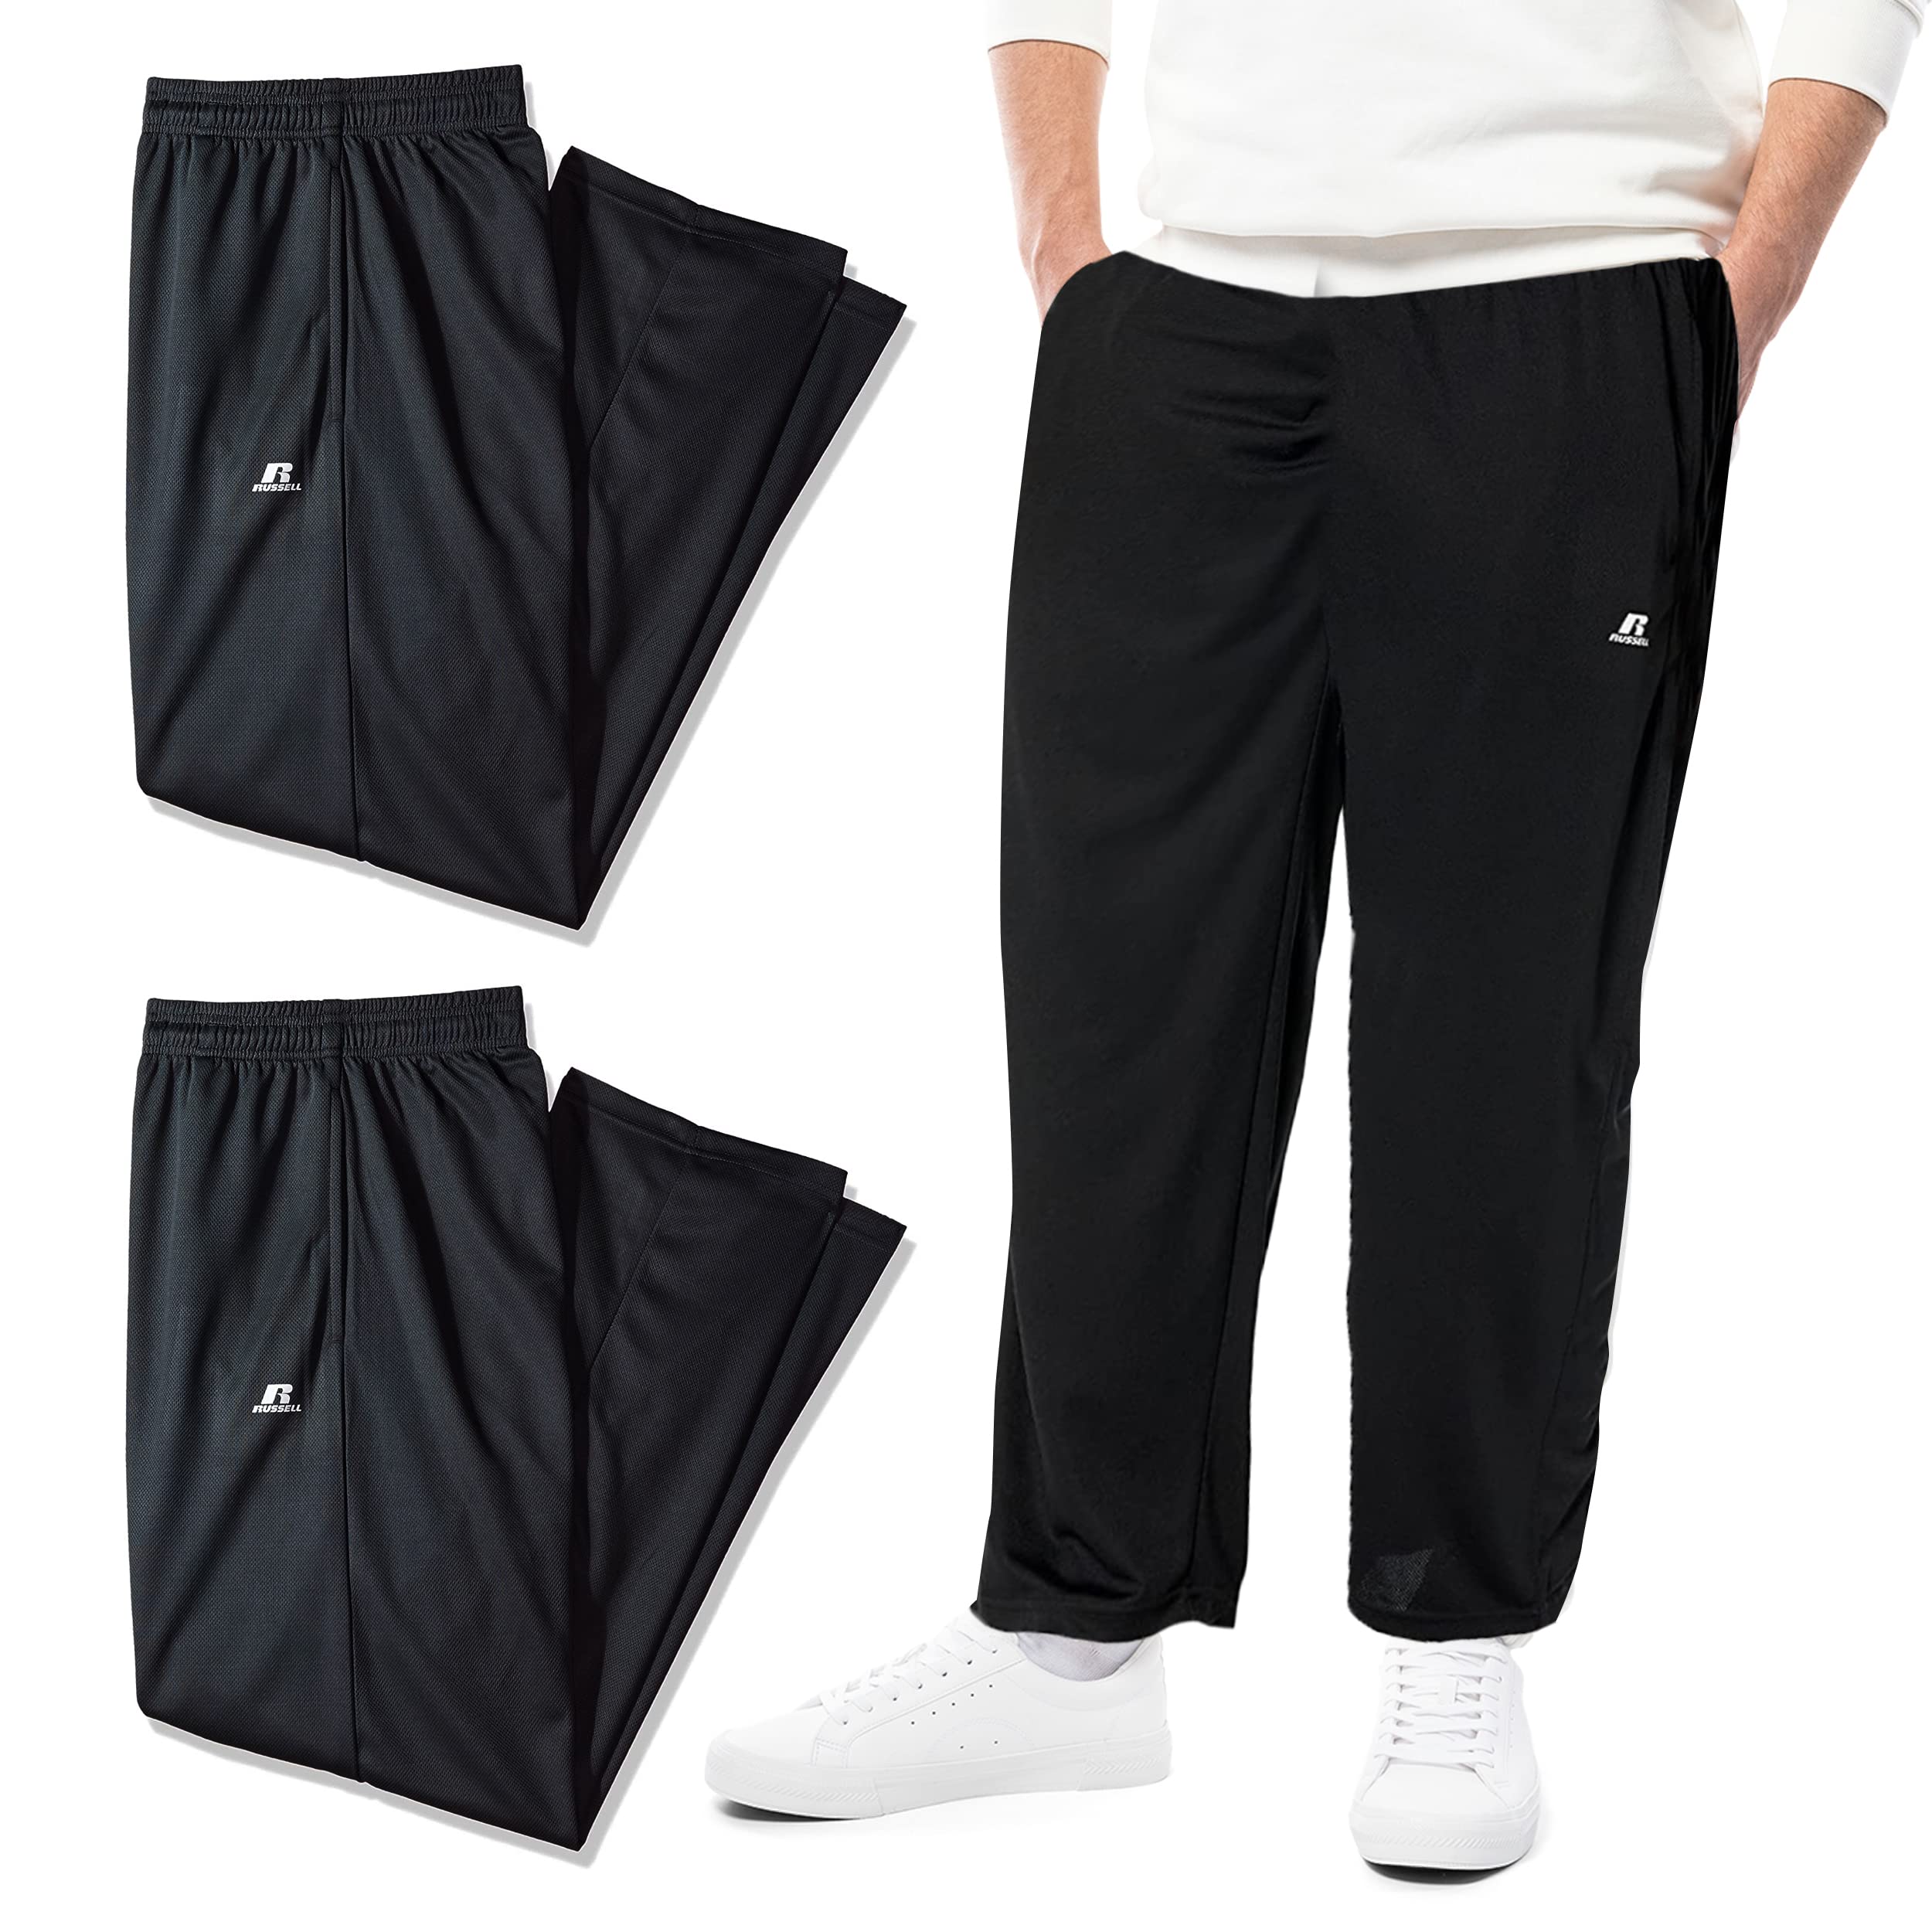 Russell Athletic Big & Tall Track Pants for Men, 2 Pack